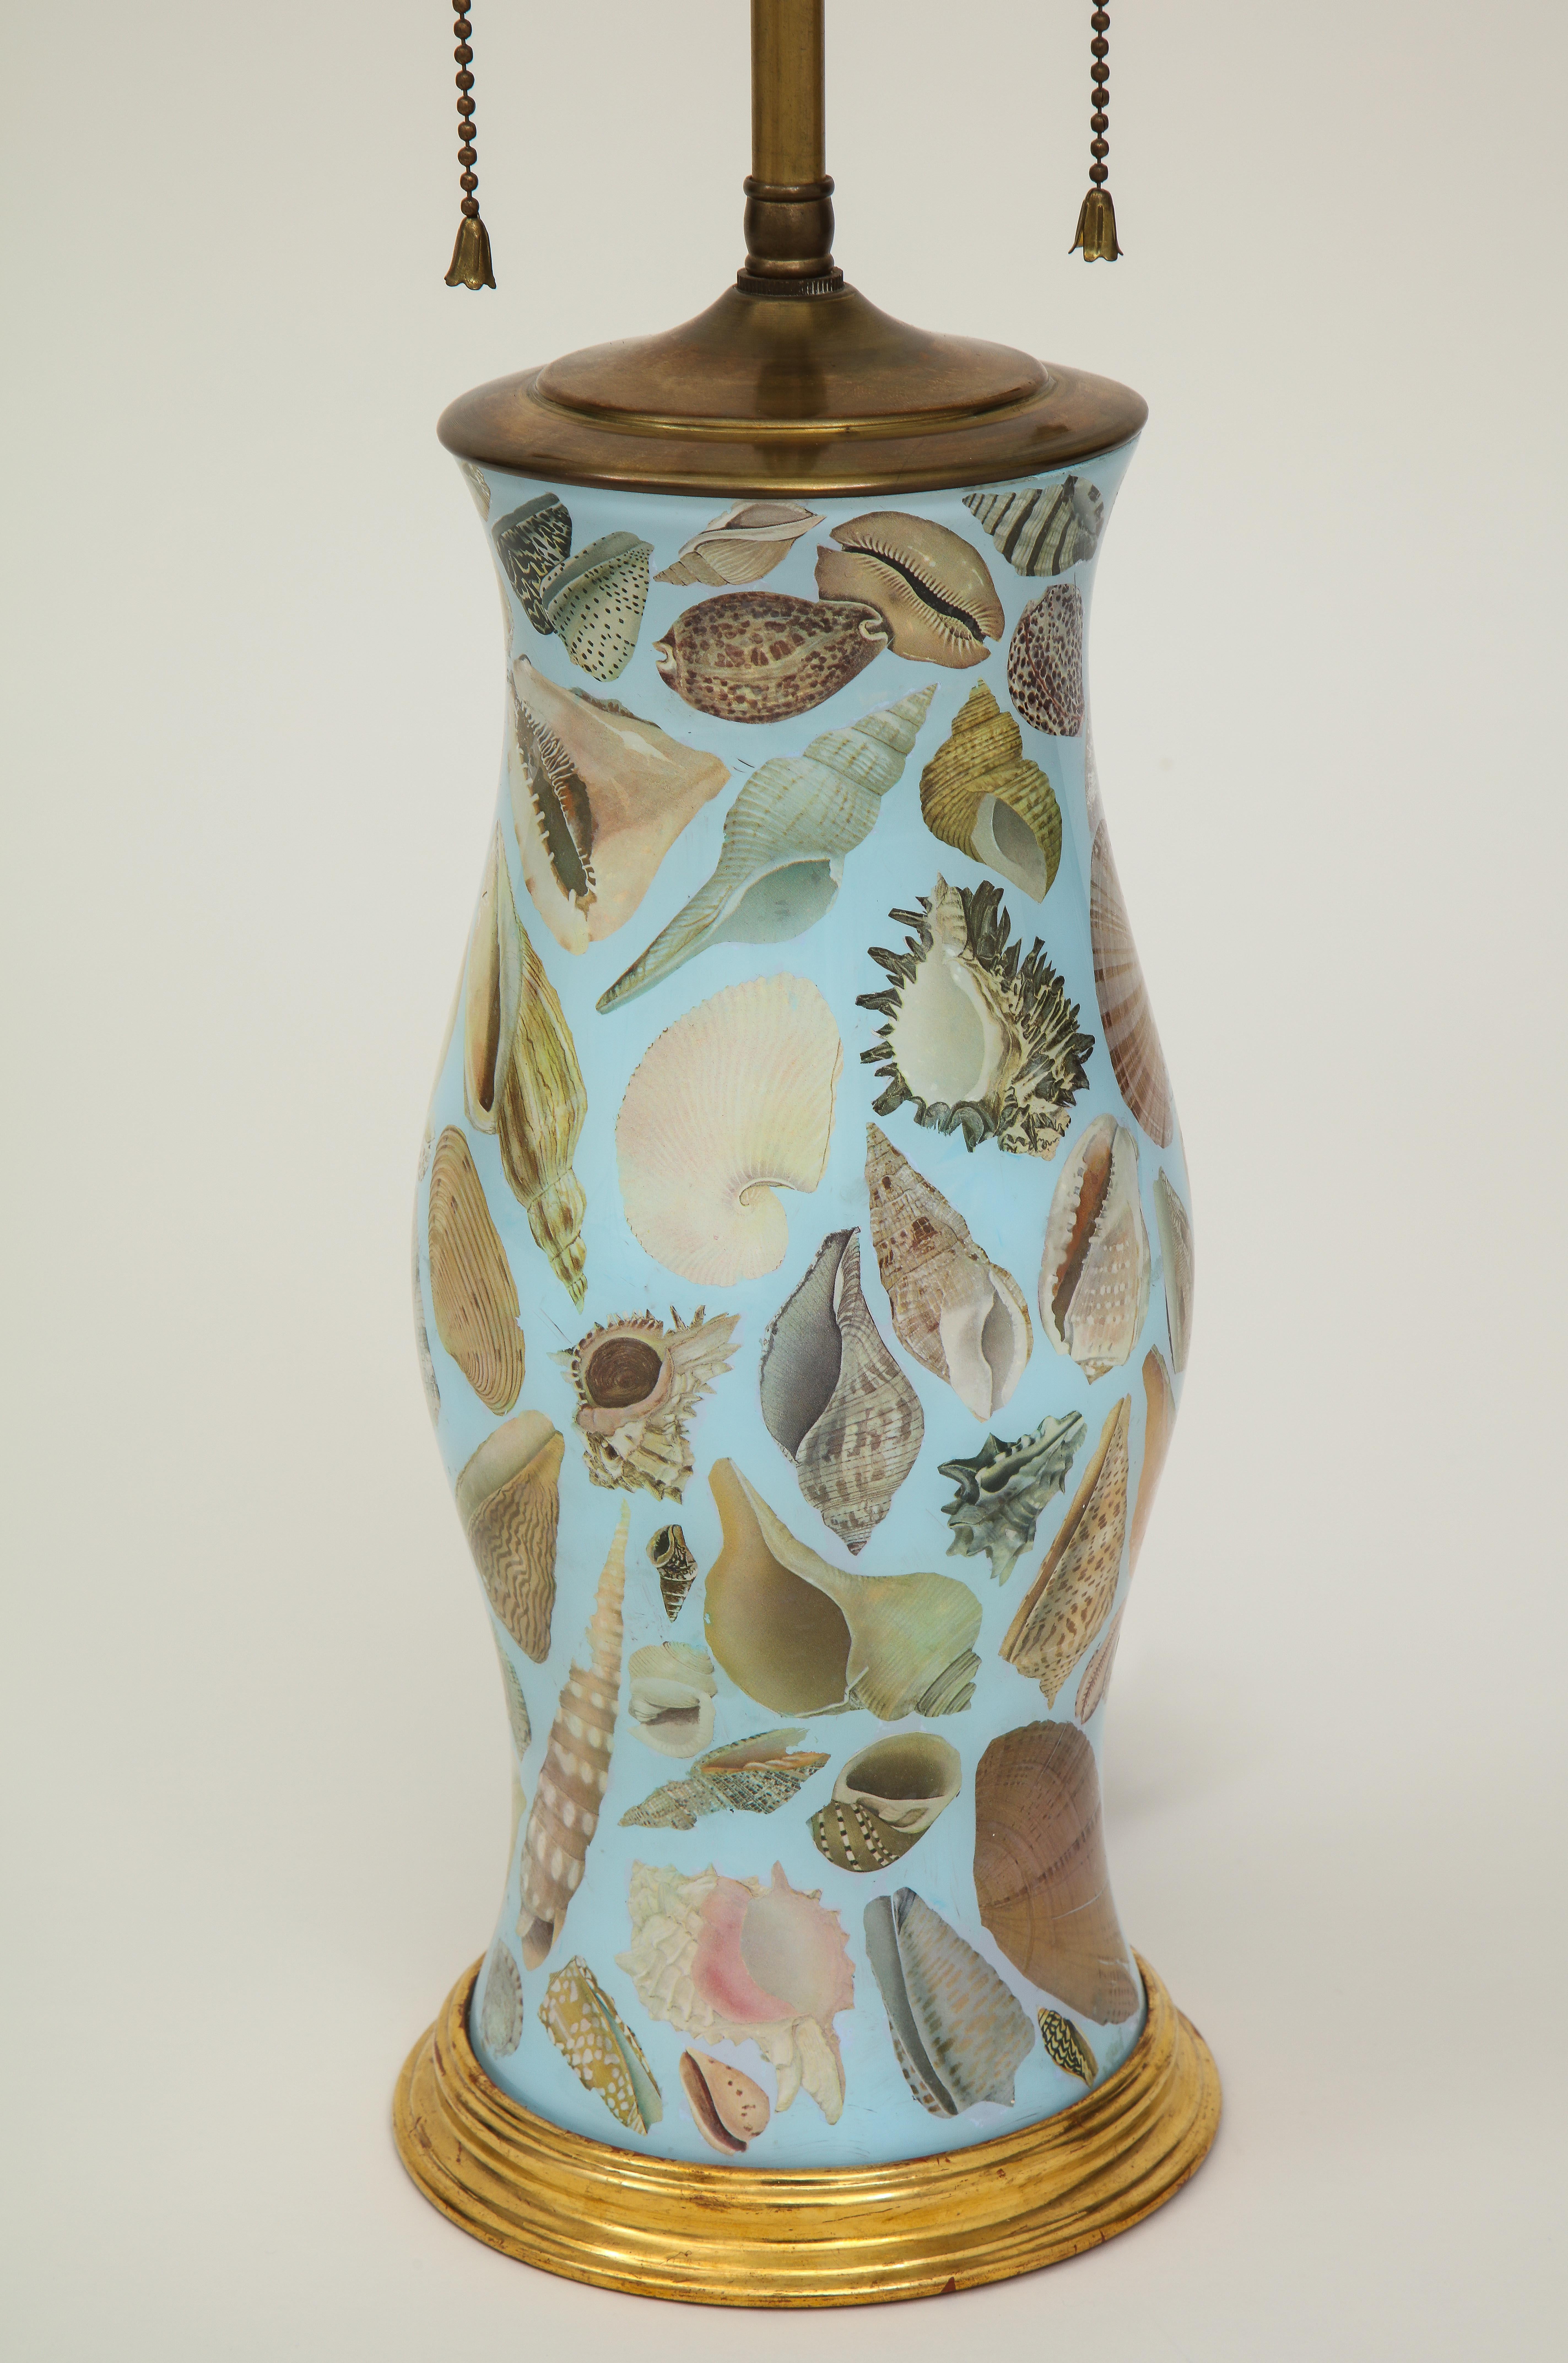 Featuring a charming variety of different seashells; on gilt base; mounted with two-light sockets and adjustable height. Height to top of vase is 13